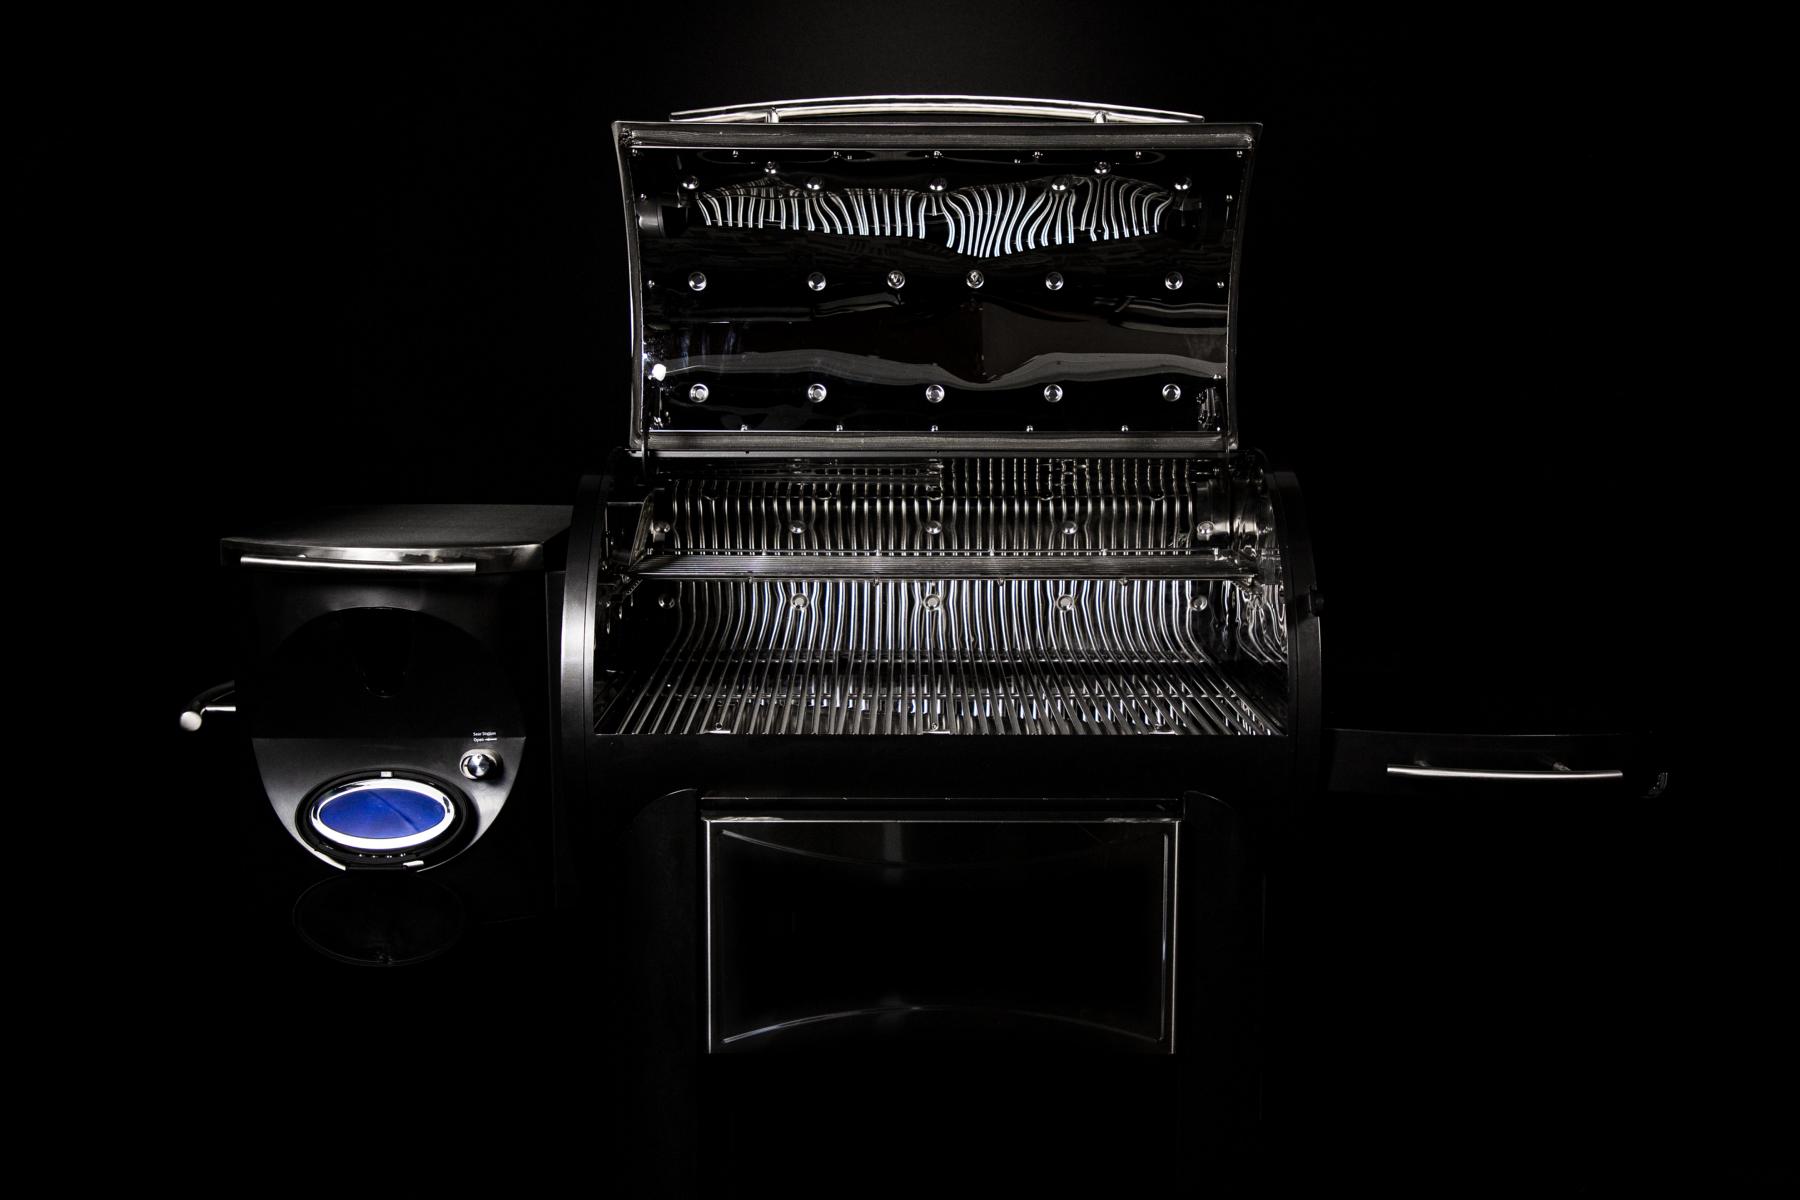 LOUISIANA GRILLS Legacy 800 Founders Series